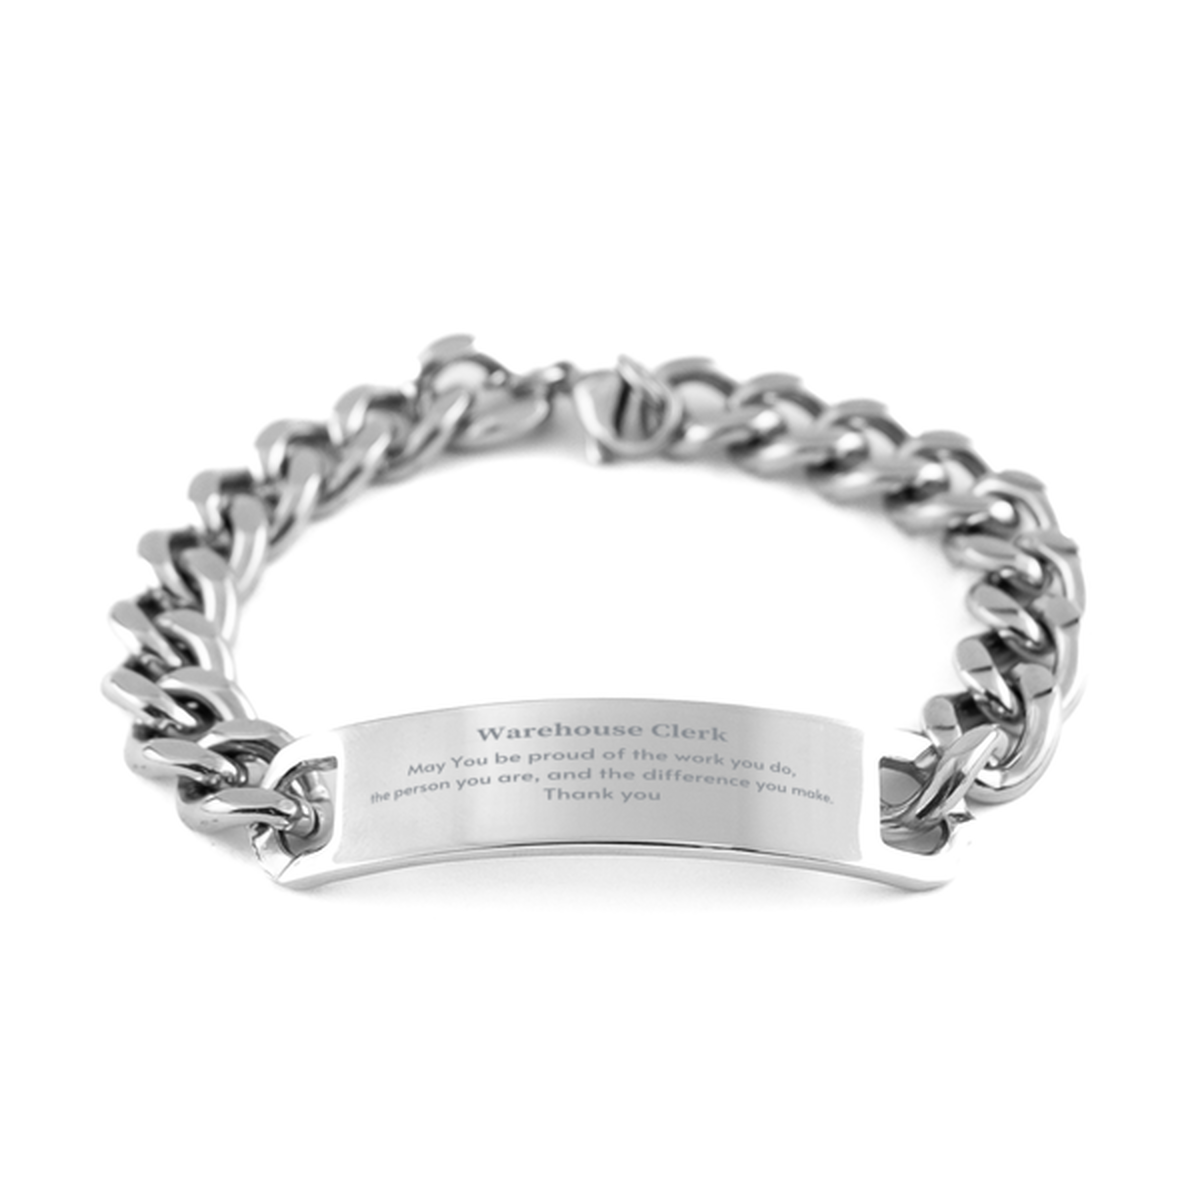 Heartwarming Cuban Chain Stainless Steel Bracelet Retirement Coworkers Gifts for Warehouse Clerk, Warehouse Clerk May You be proud of the work you do, the person you are Gifts for Boss Men Women Friends